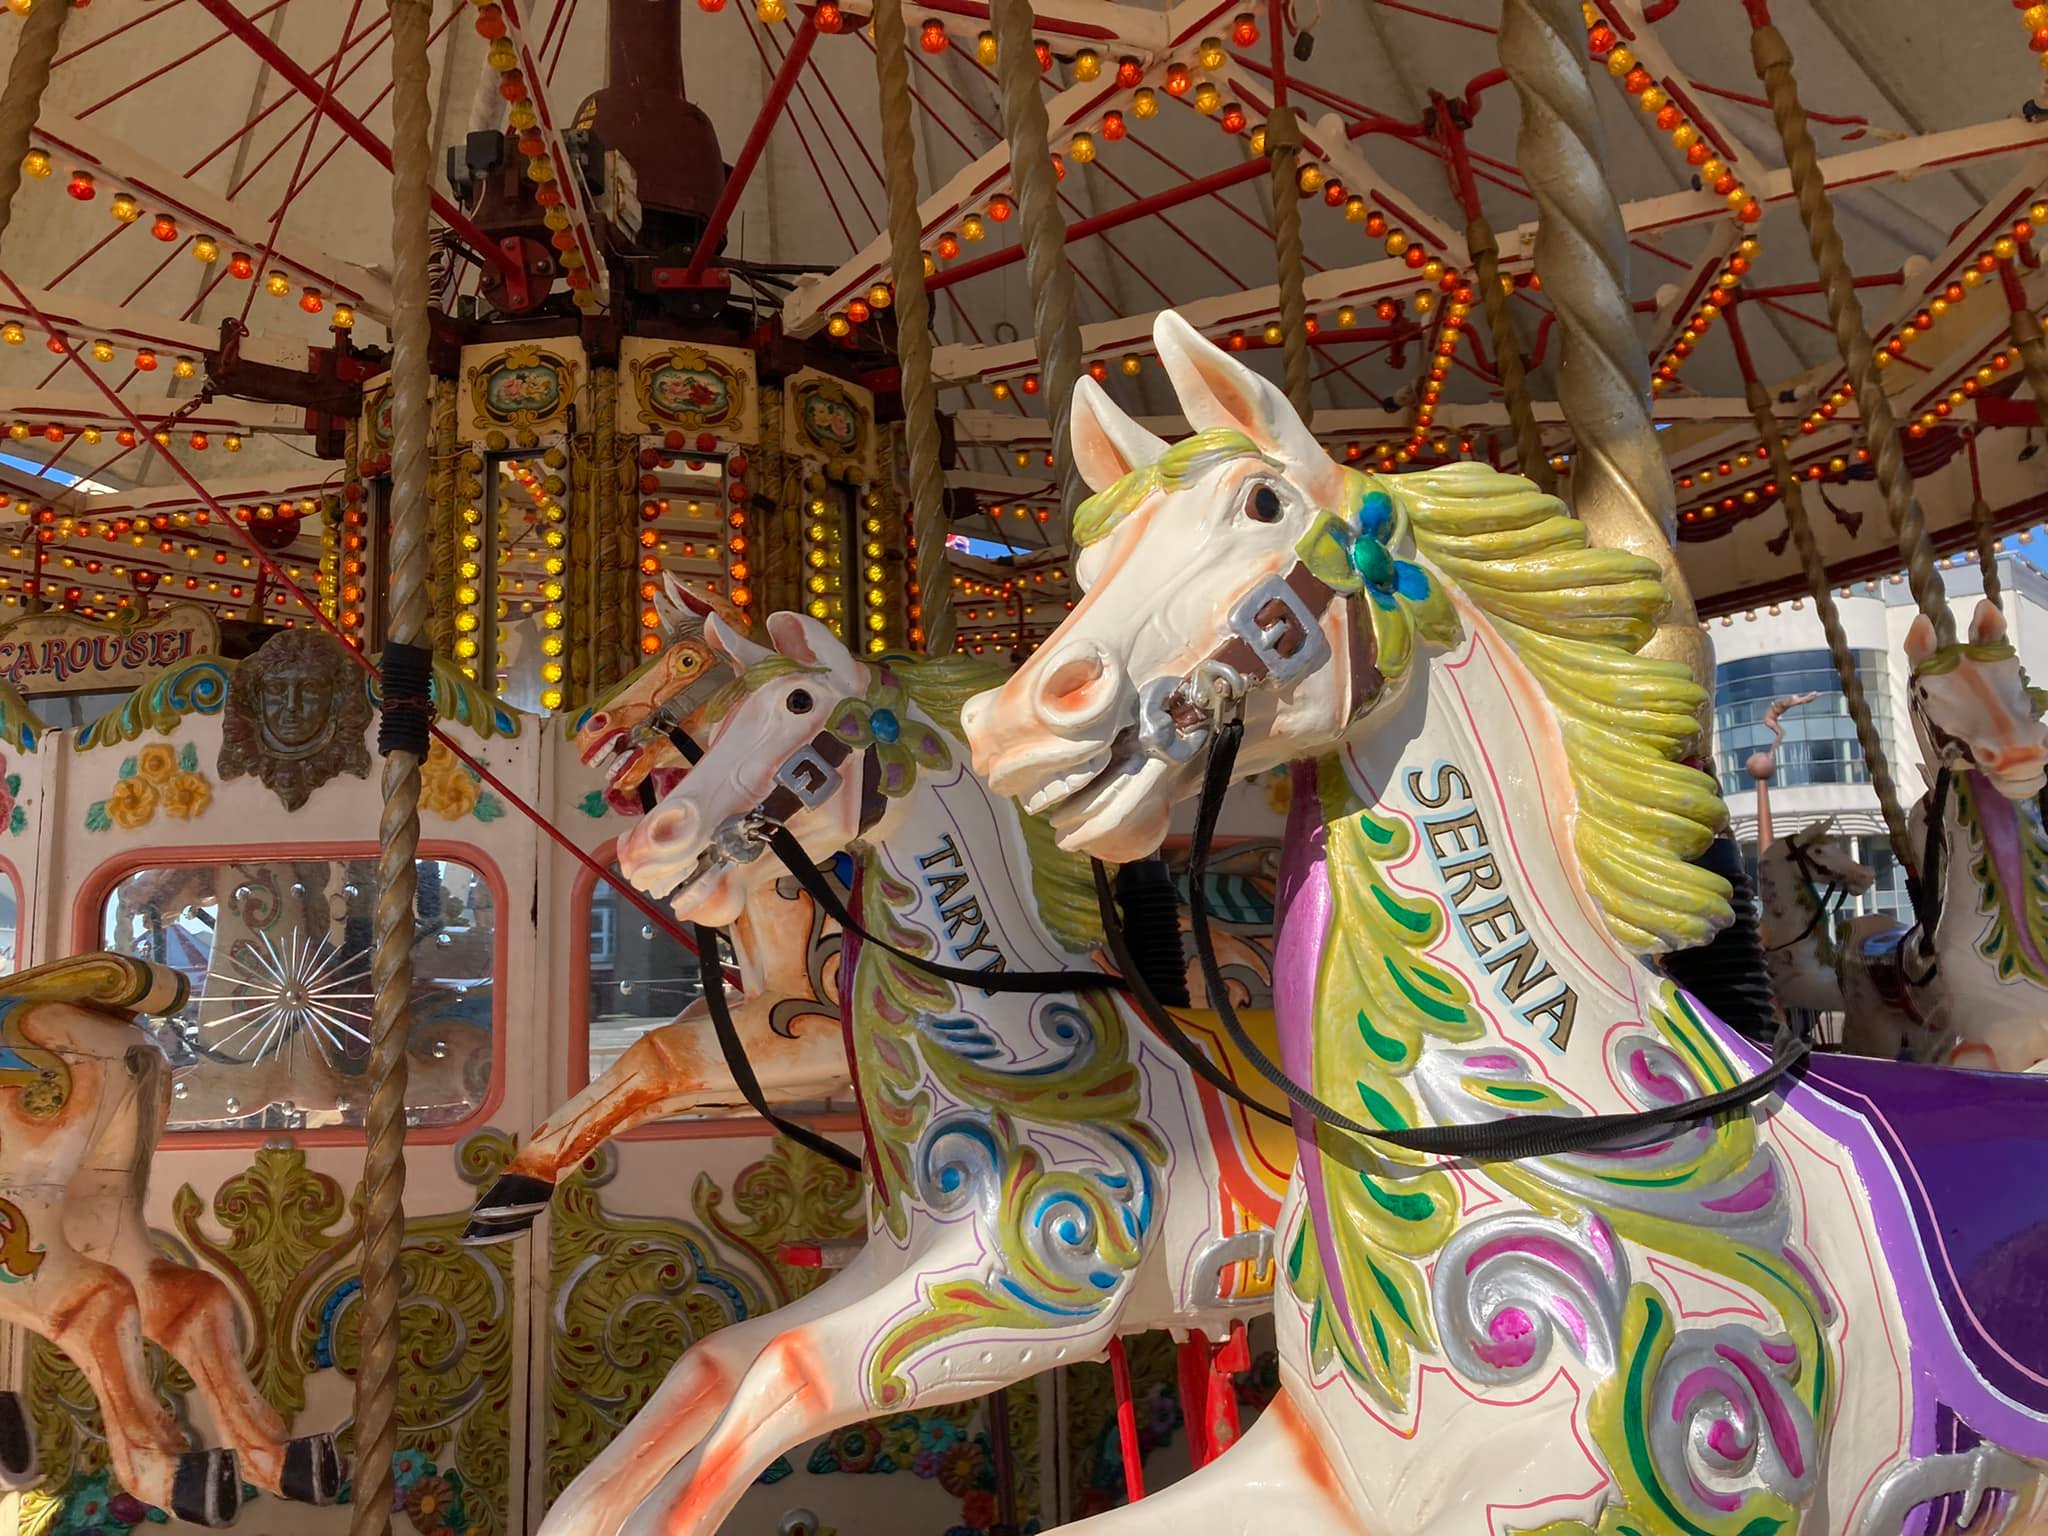 Silcock's Carousel in Southport